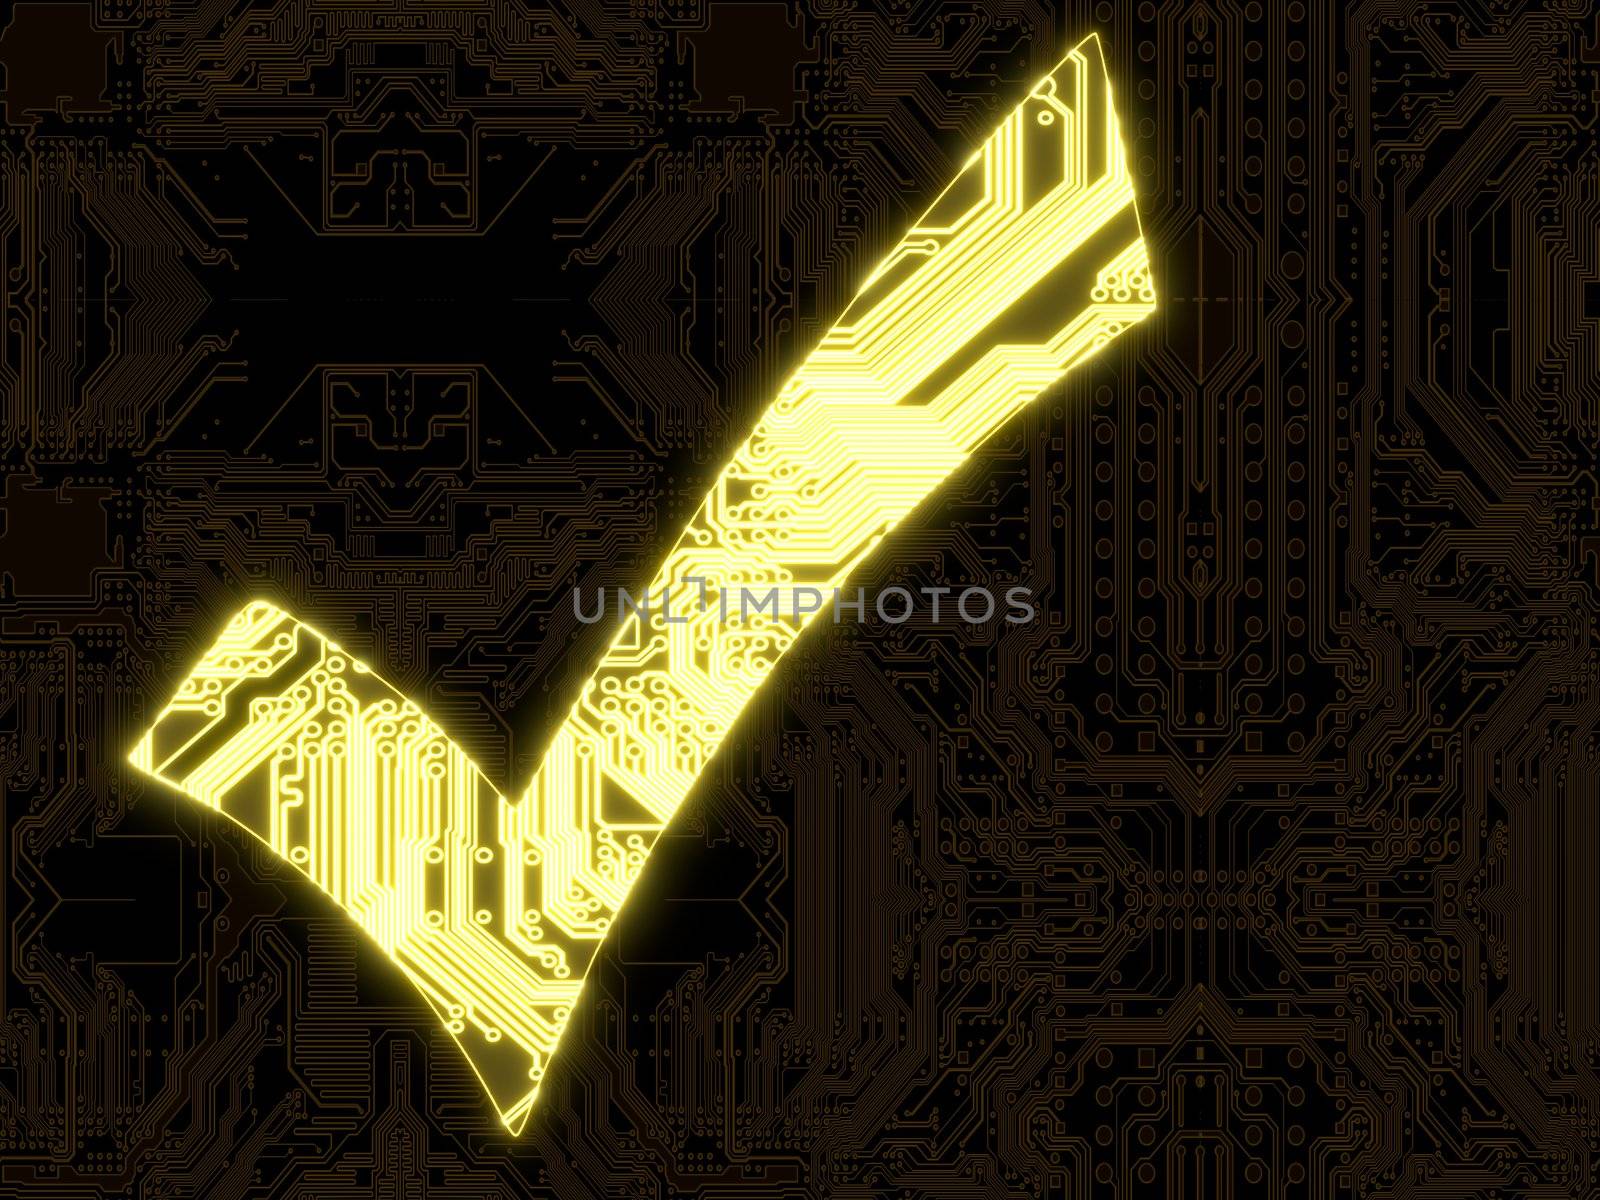  3D Graphic flare electronic glowing symbol on a computer chip